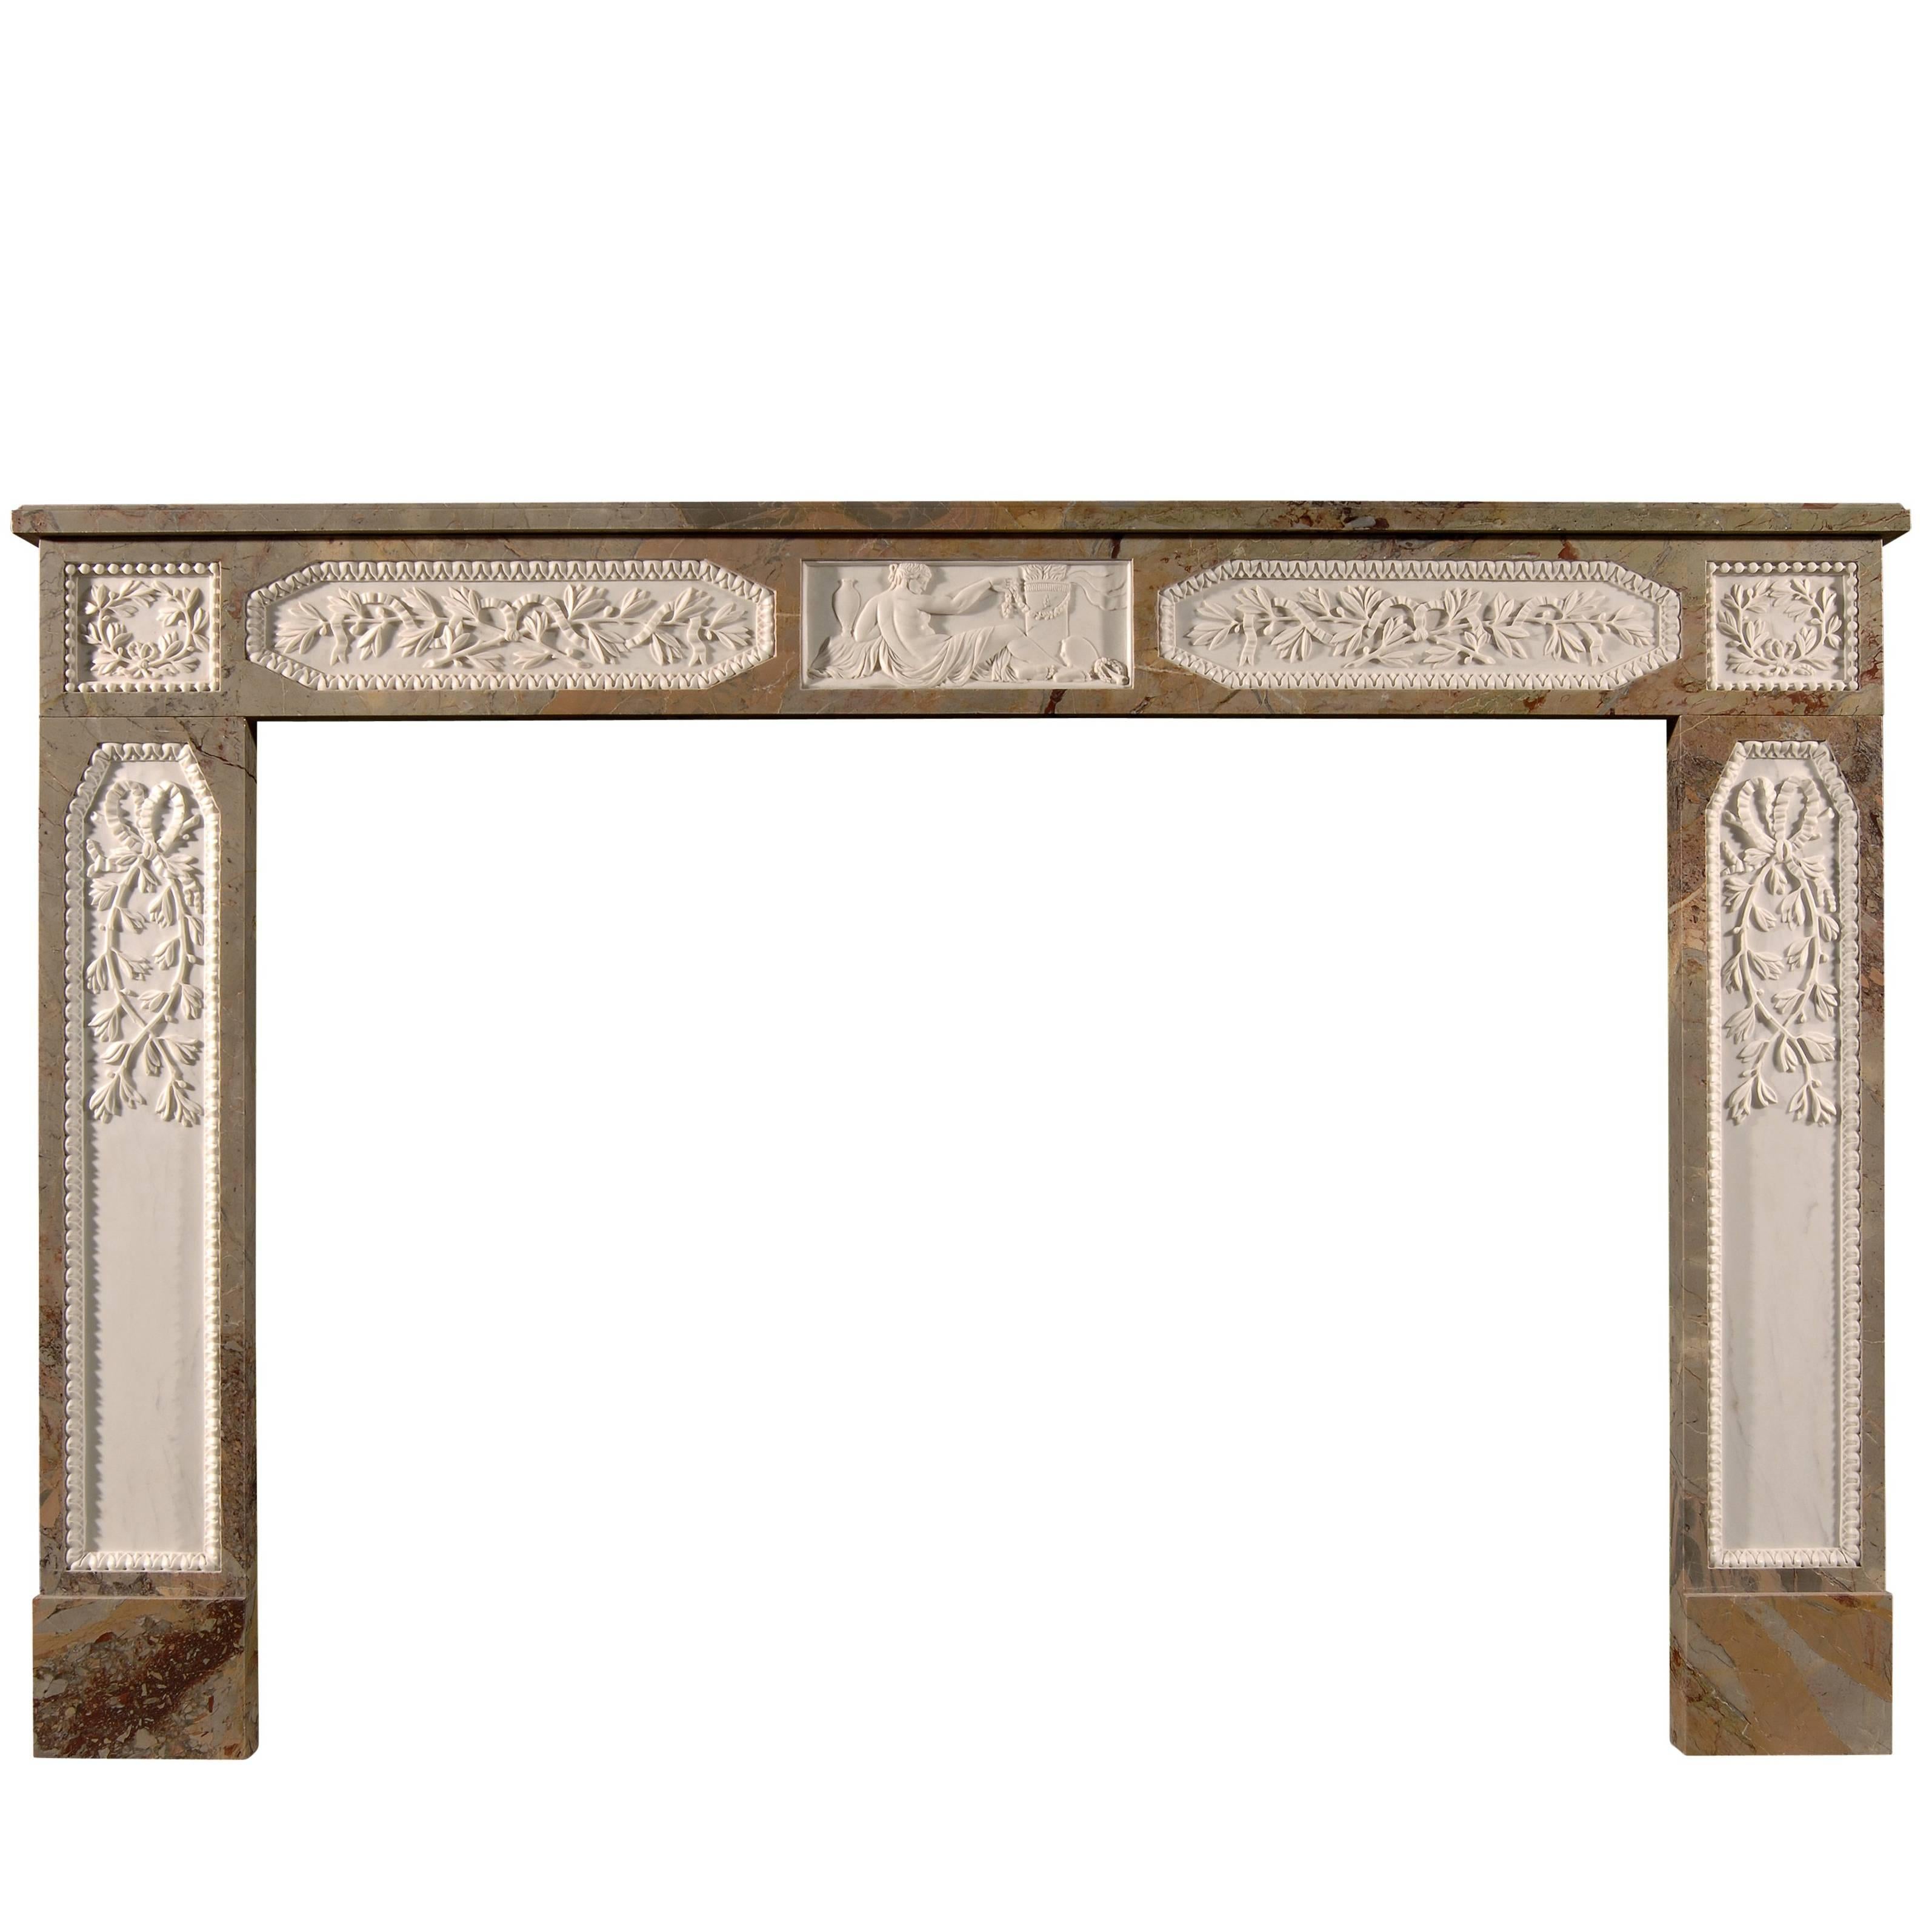 Sarrancolin French Louis XVI Style Marble Fireplace